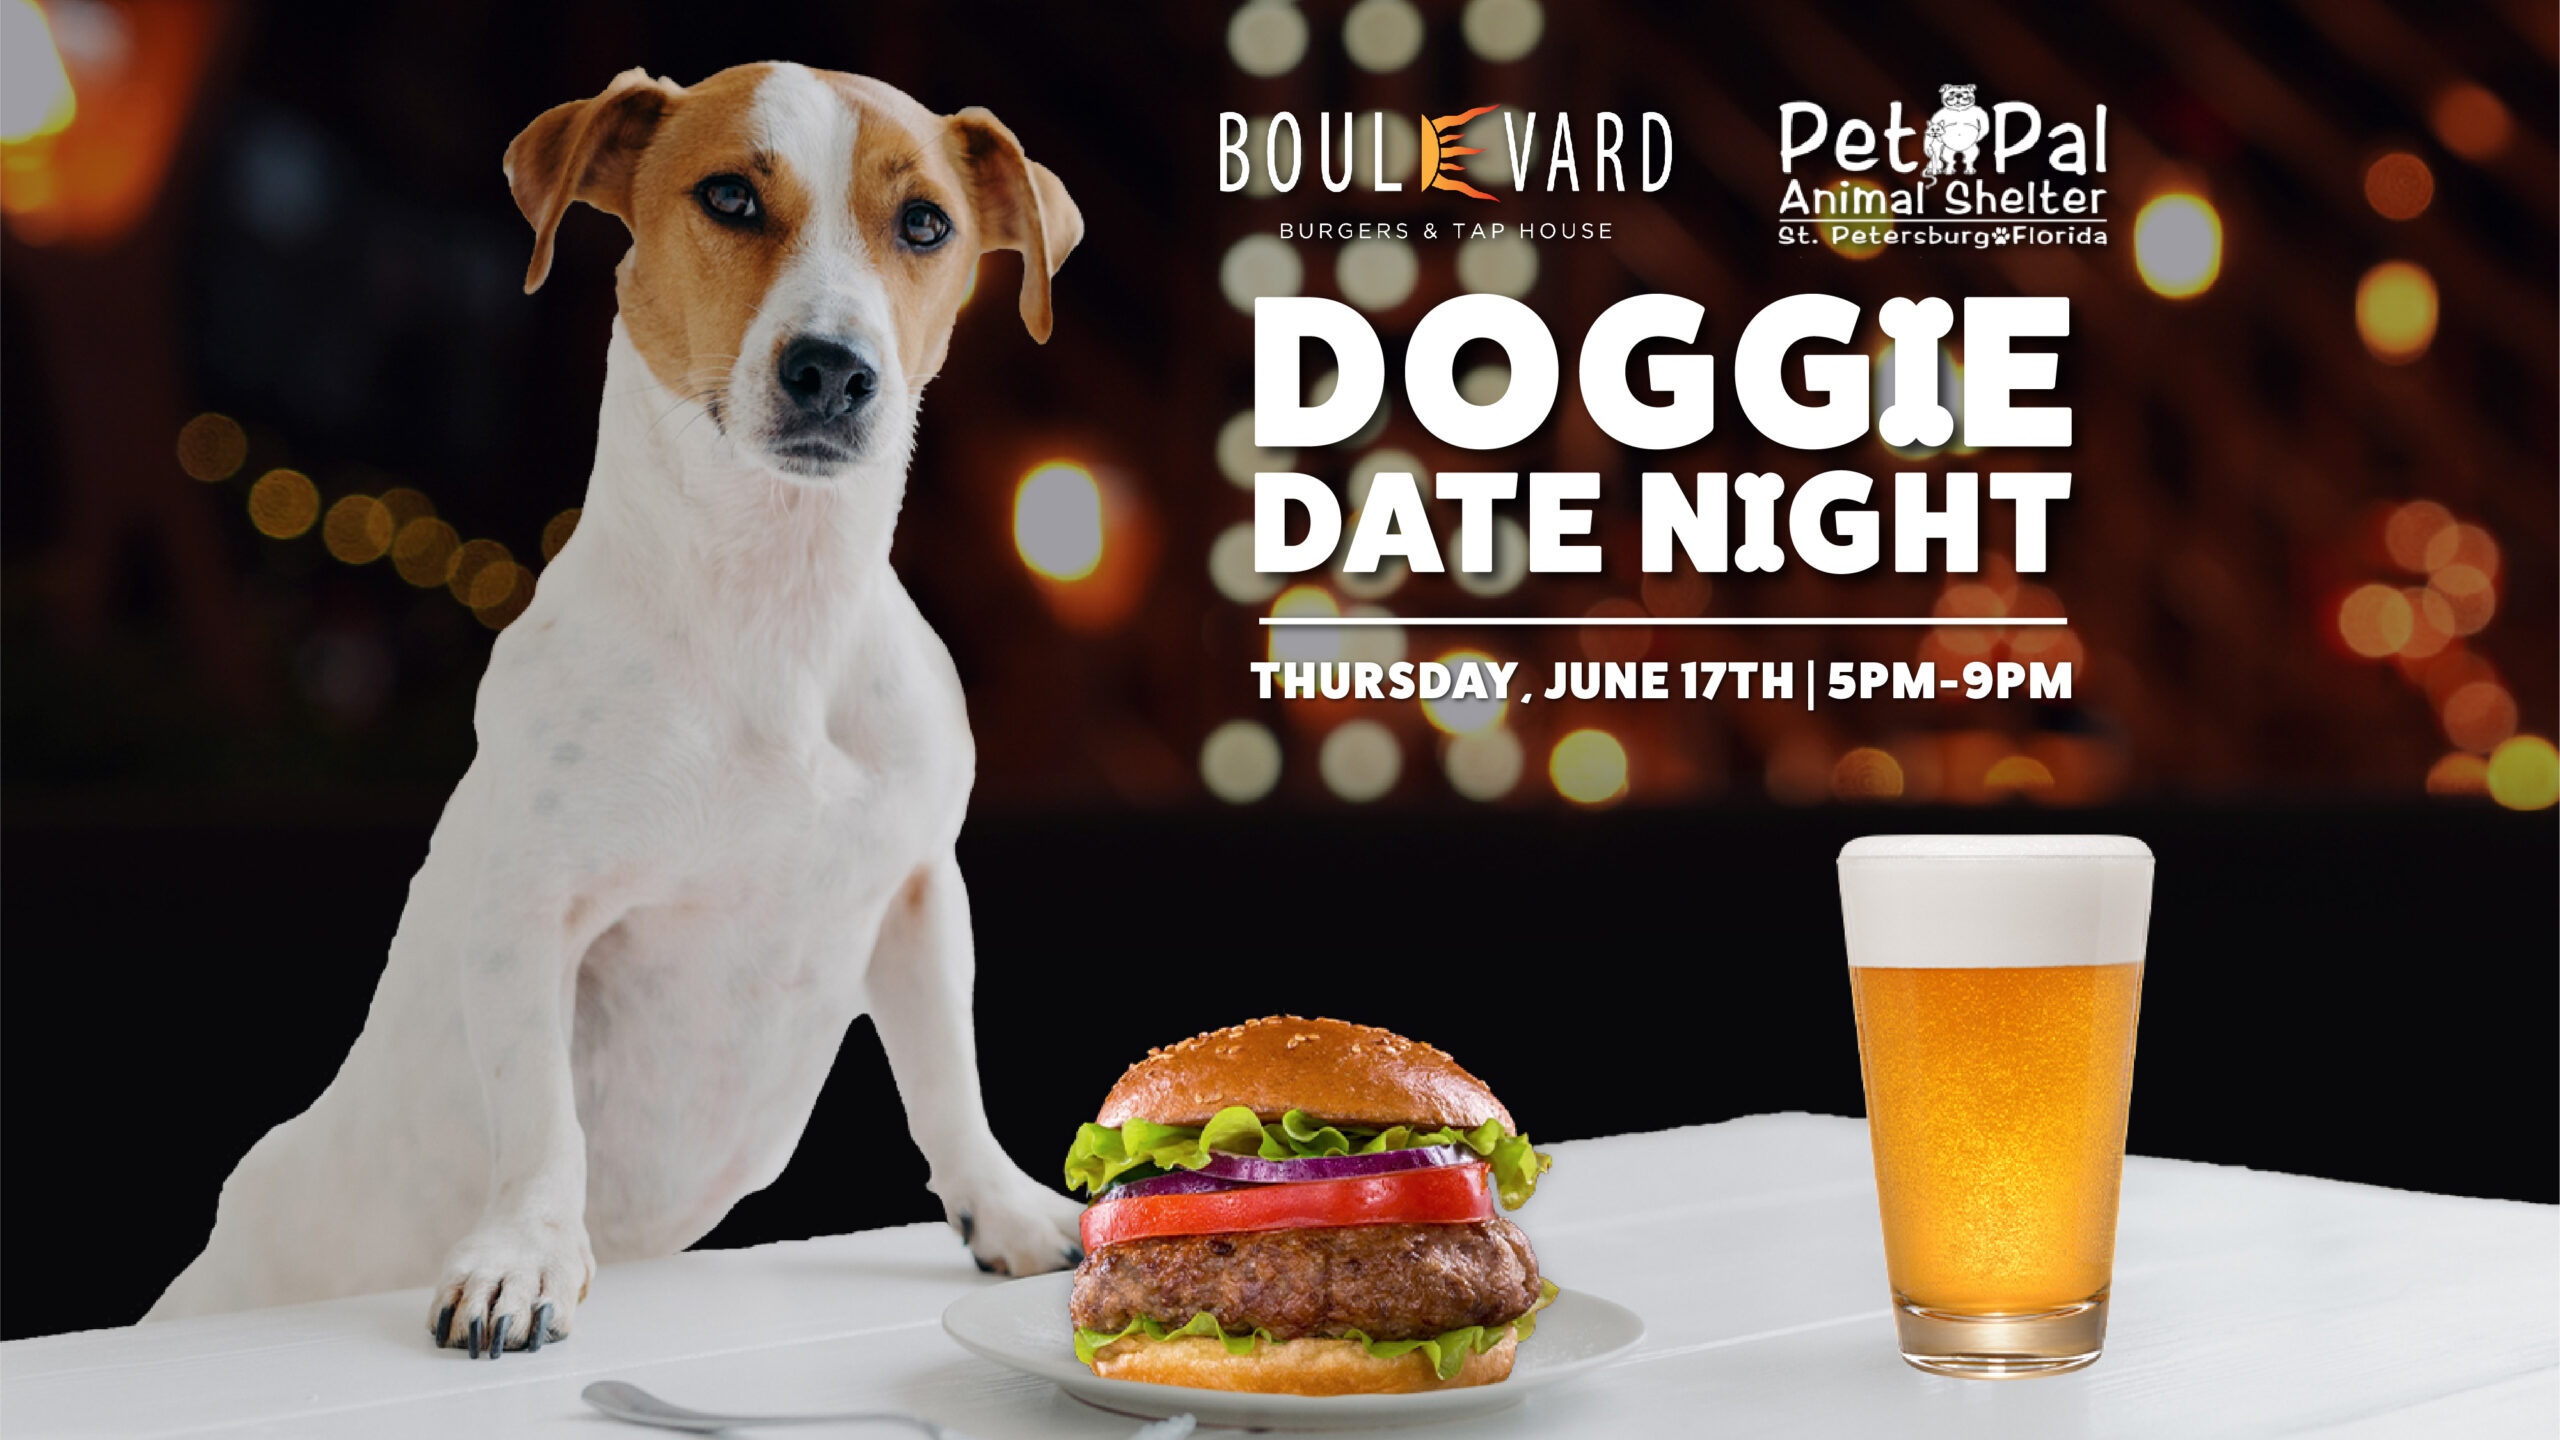 St. Pete Beach Restaurant Partners with Pet Pal Animal Shelter for “Doggie Date Night”